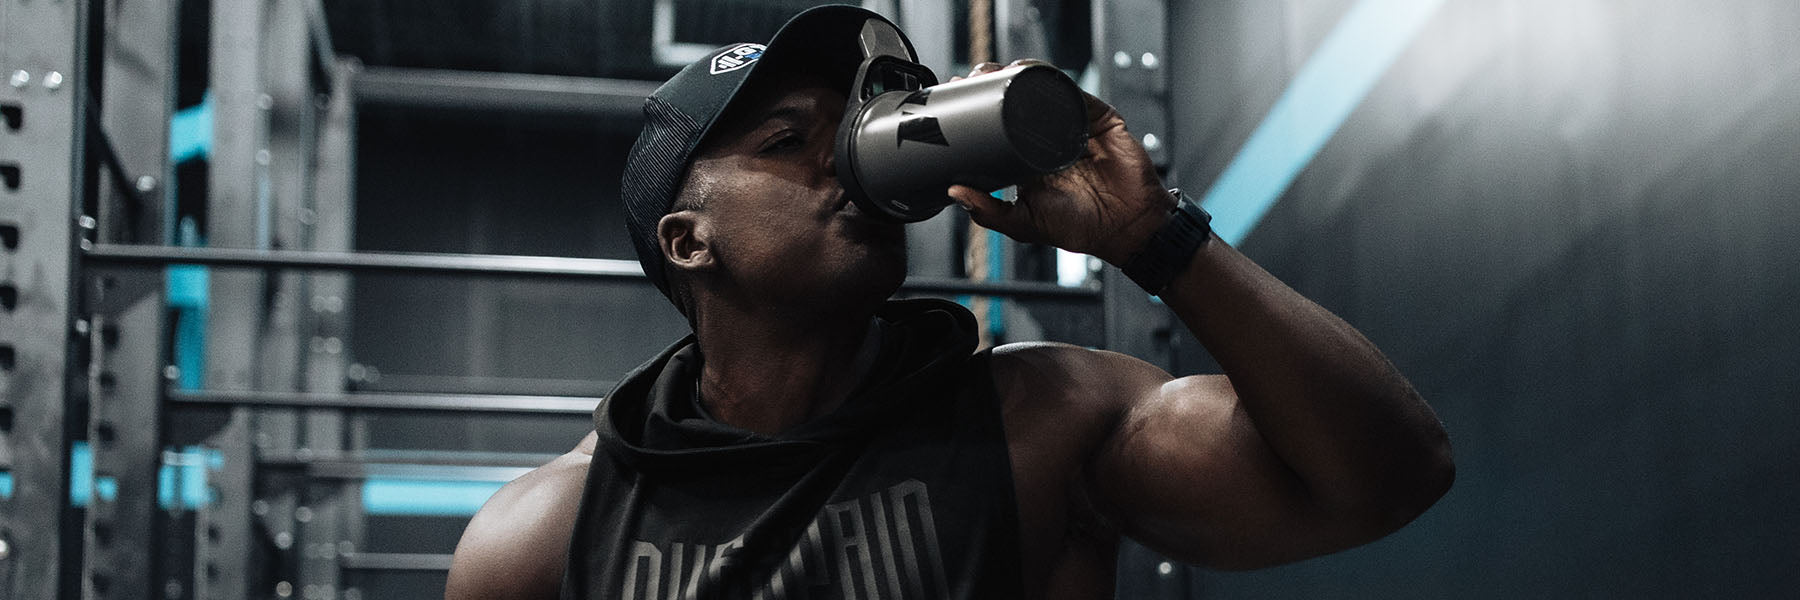 Should You Have a Protein Shake Before or after You Workout?